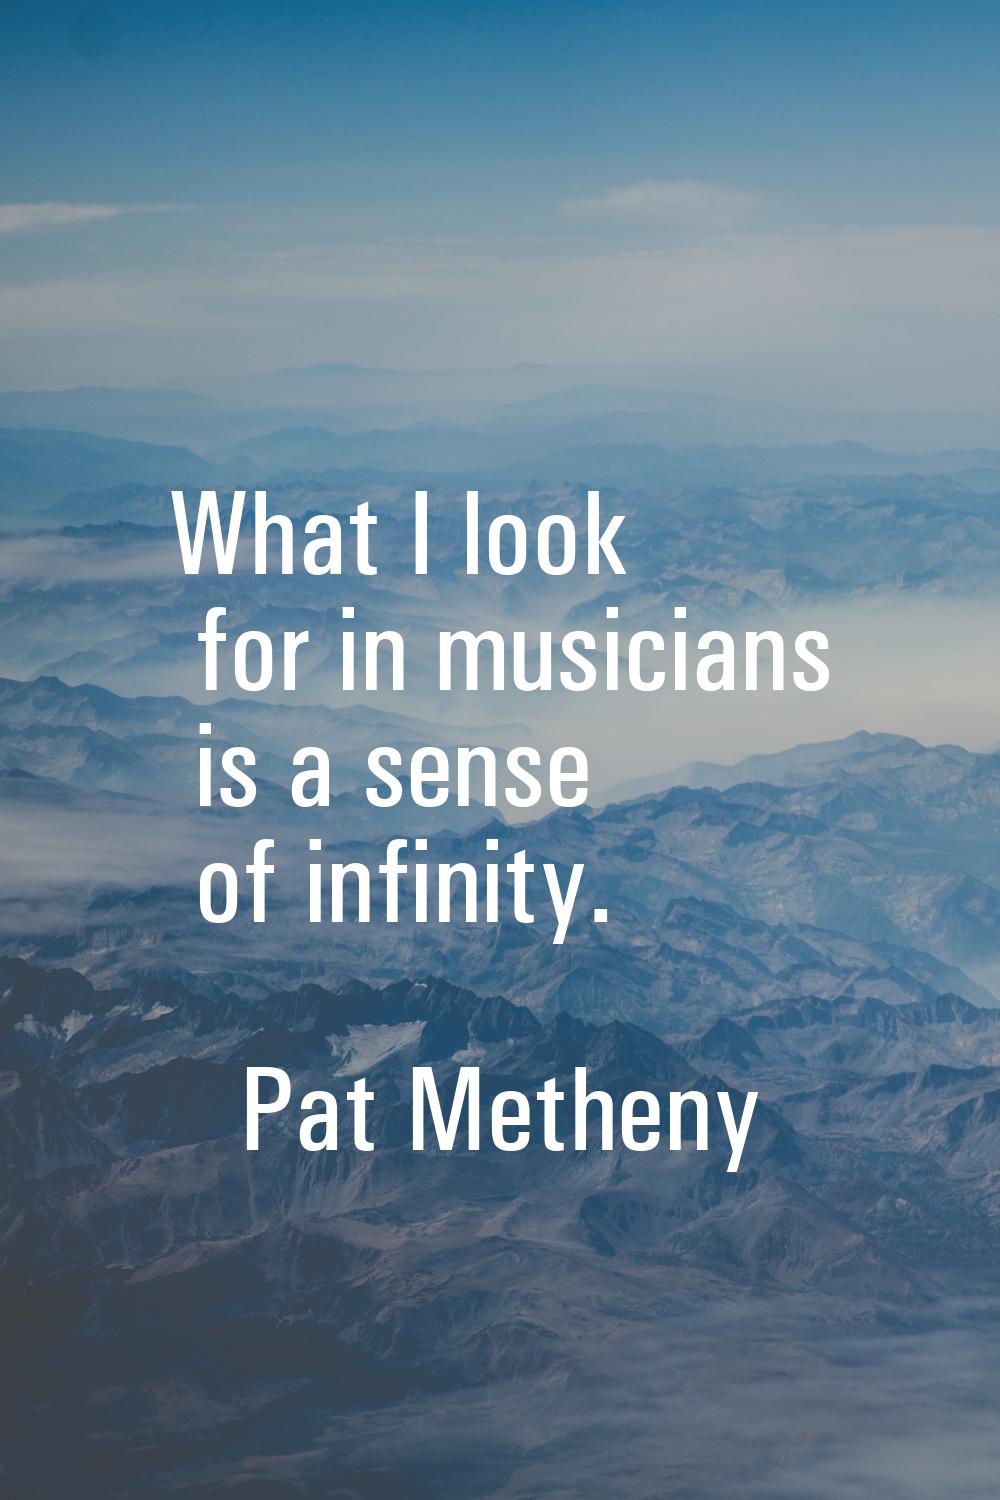 What I look for in musicians is a sense of infinity.